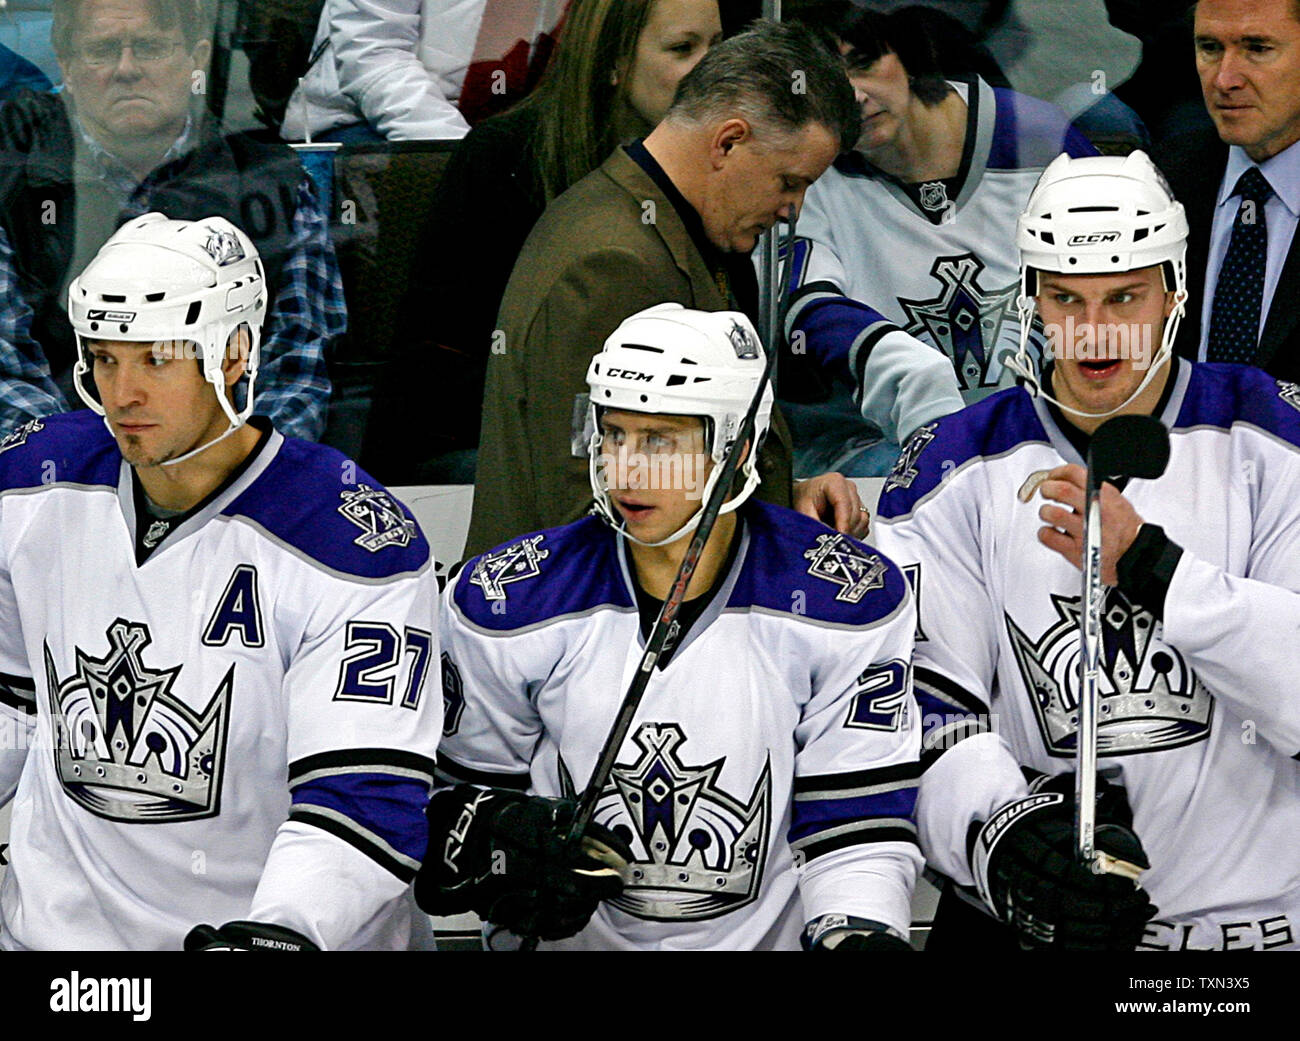 Los Angeles Kings head coach Marc Crawford paces behind Kings (L-R) Scott  Thornton, Jeff Giuliano, and Raitis Ivanans during the second period at the  Pepsi Center in Denver on December 29, 2007. (